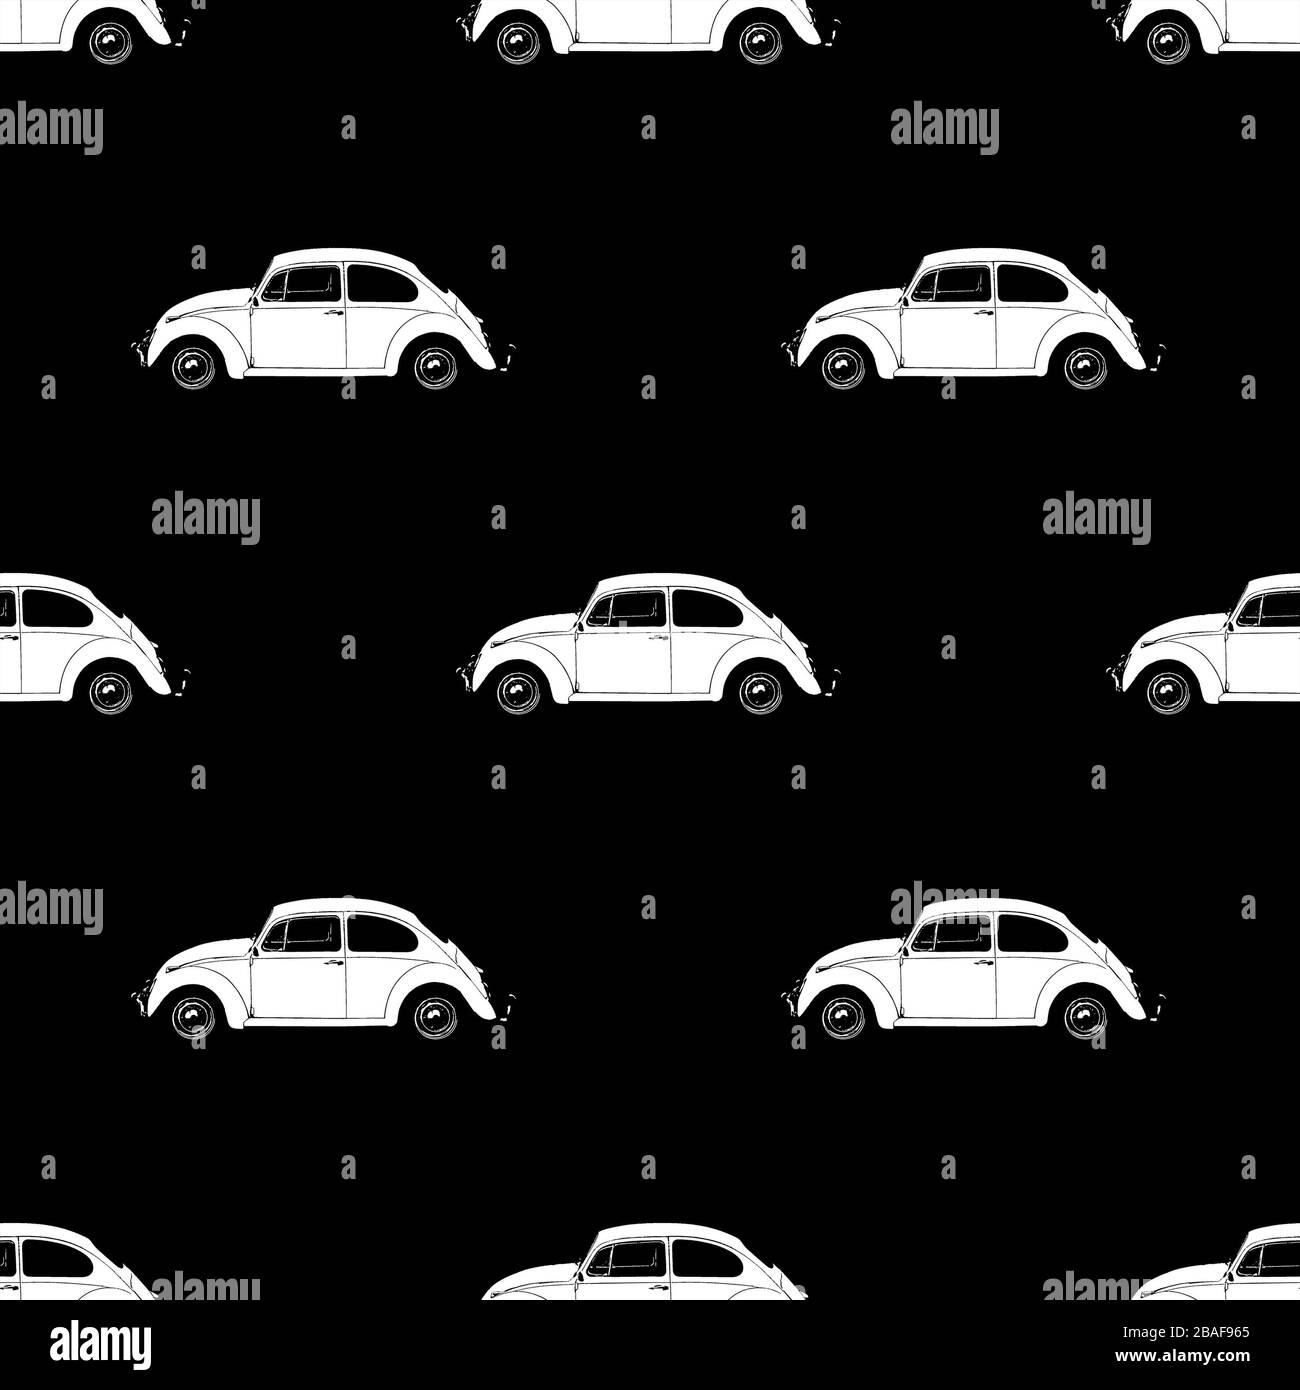 Beetle car motif graphic silhouette seamless pattern design in black and white colors Stock Photo